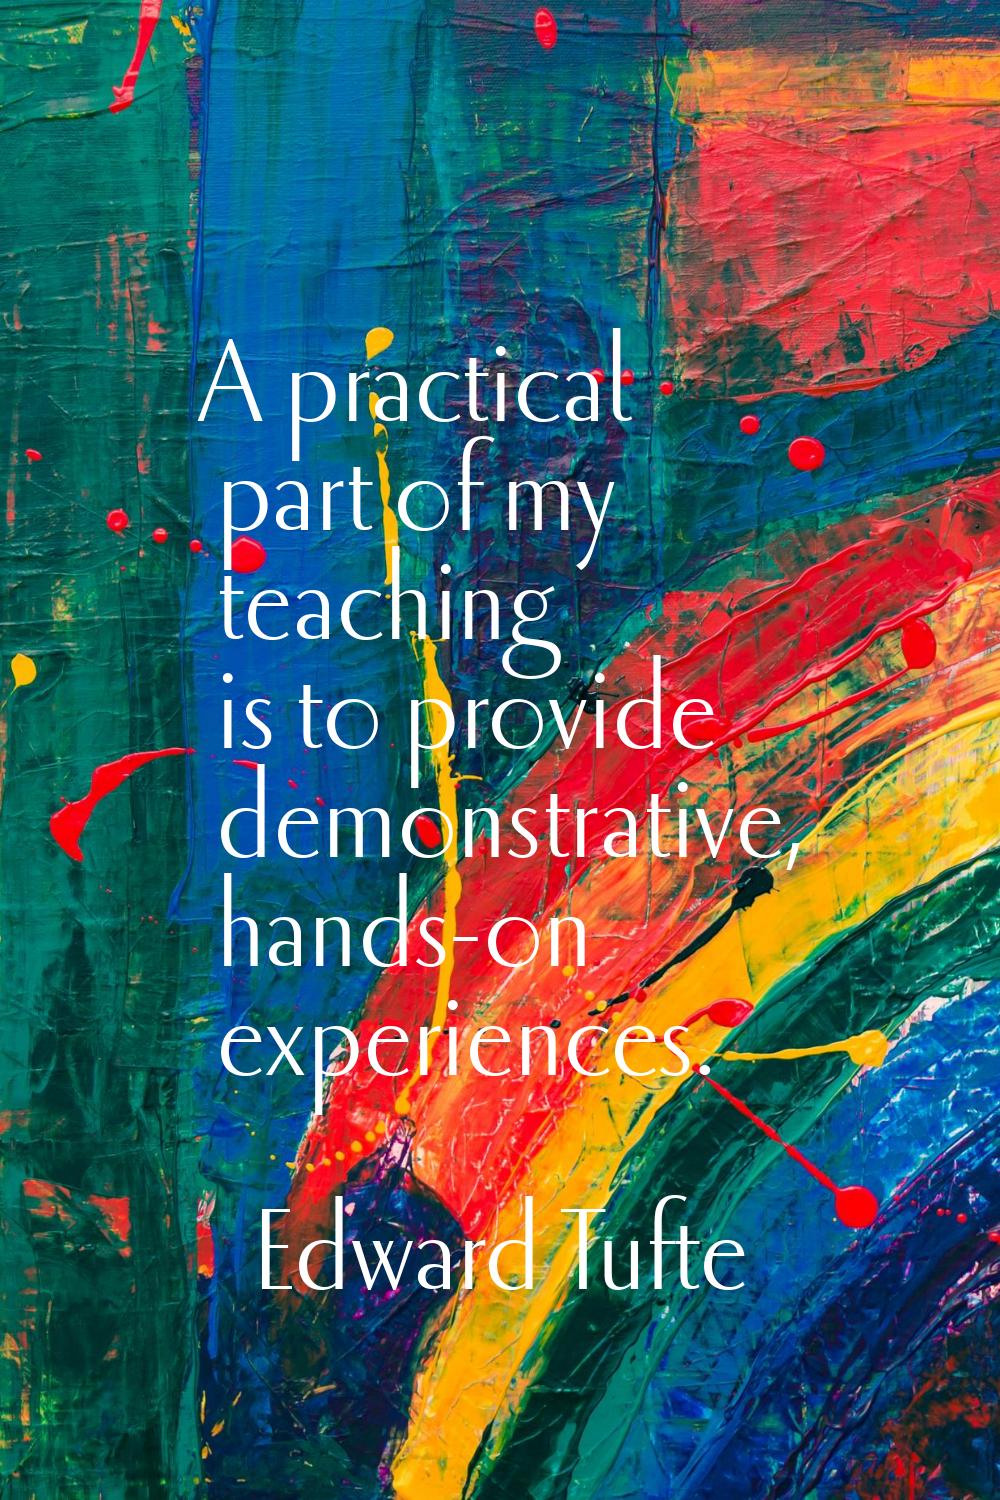 A practical part of my teaching is to provide demonstrative, hands-on experiences.